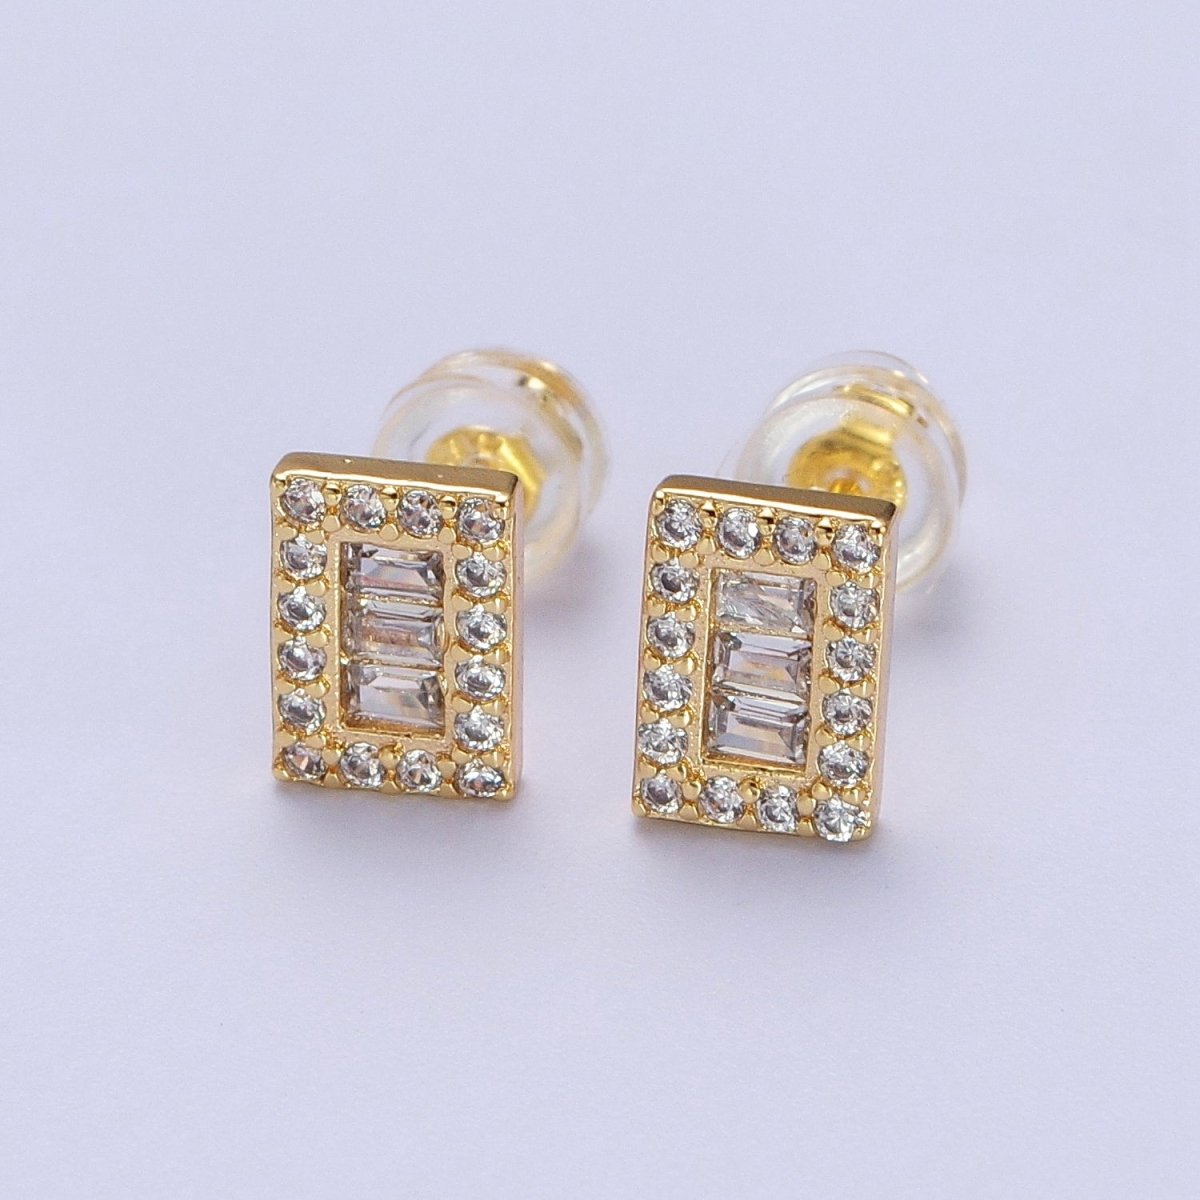 24K Gold Filled Micro Paved Baguette CZ Rectangular Bar Stud Earrings | Y-103 - DLUXCA